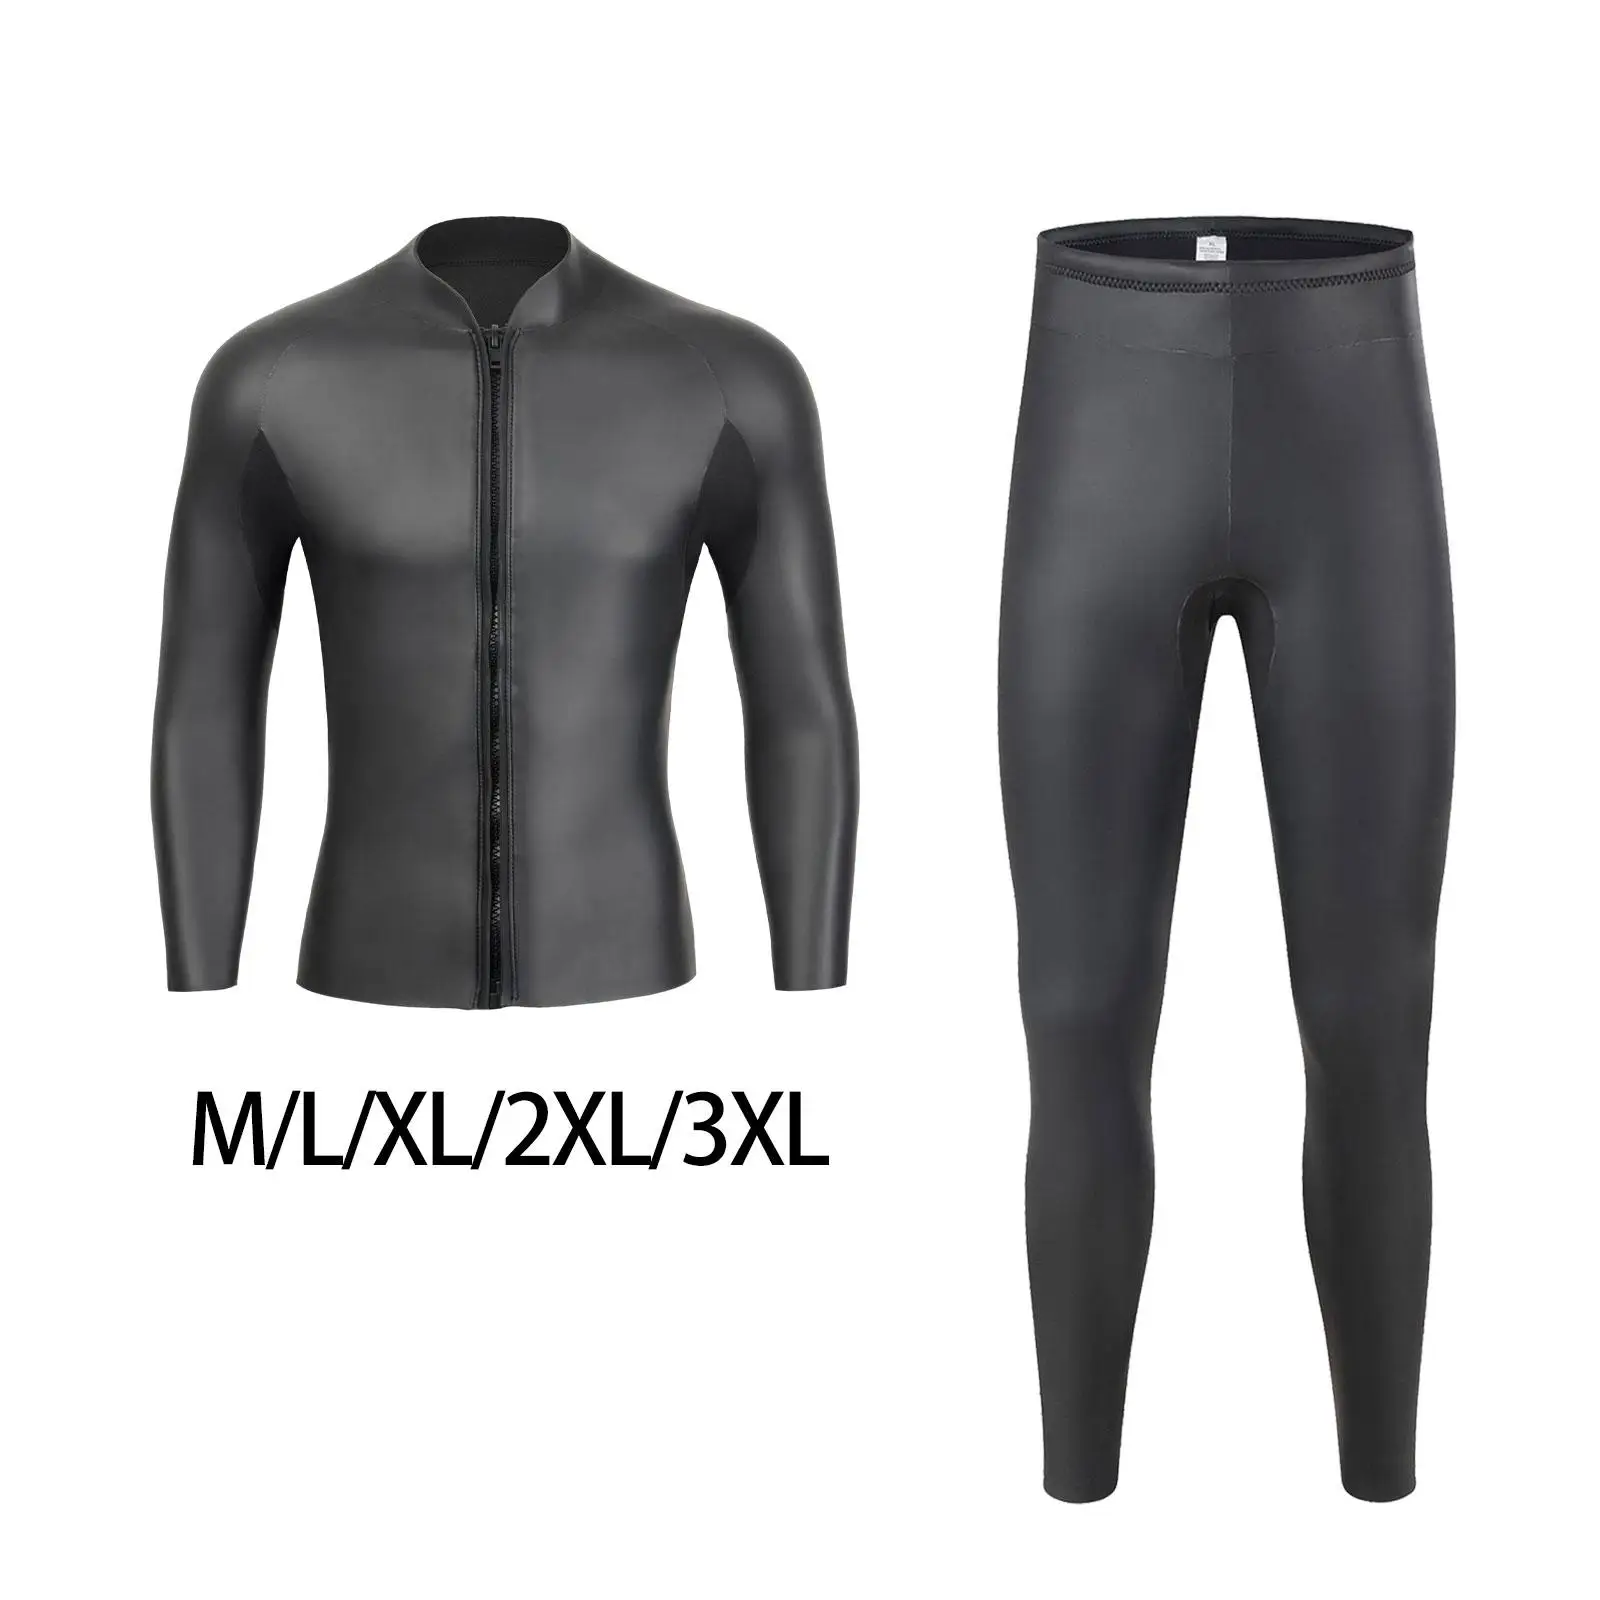 Wetsuit top Protection Body Suit for Swimming Freediving Snorkeling